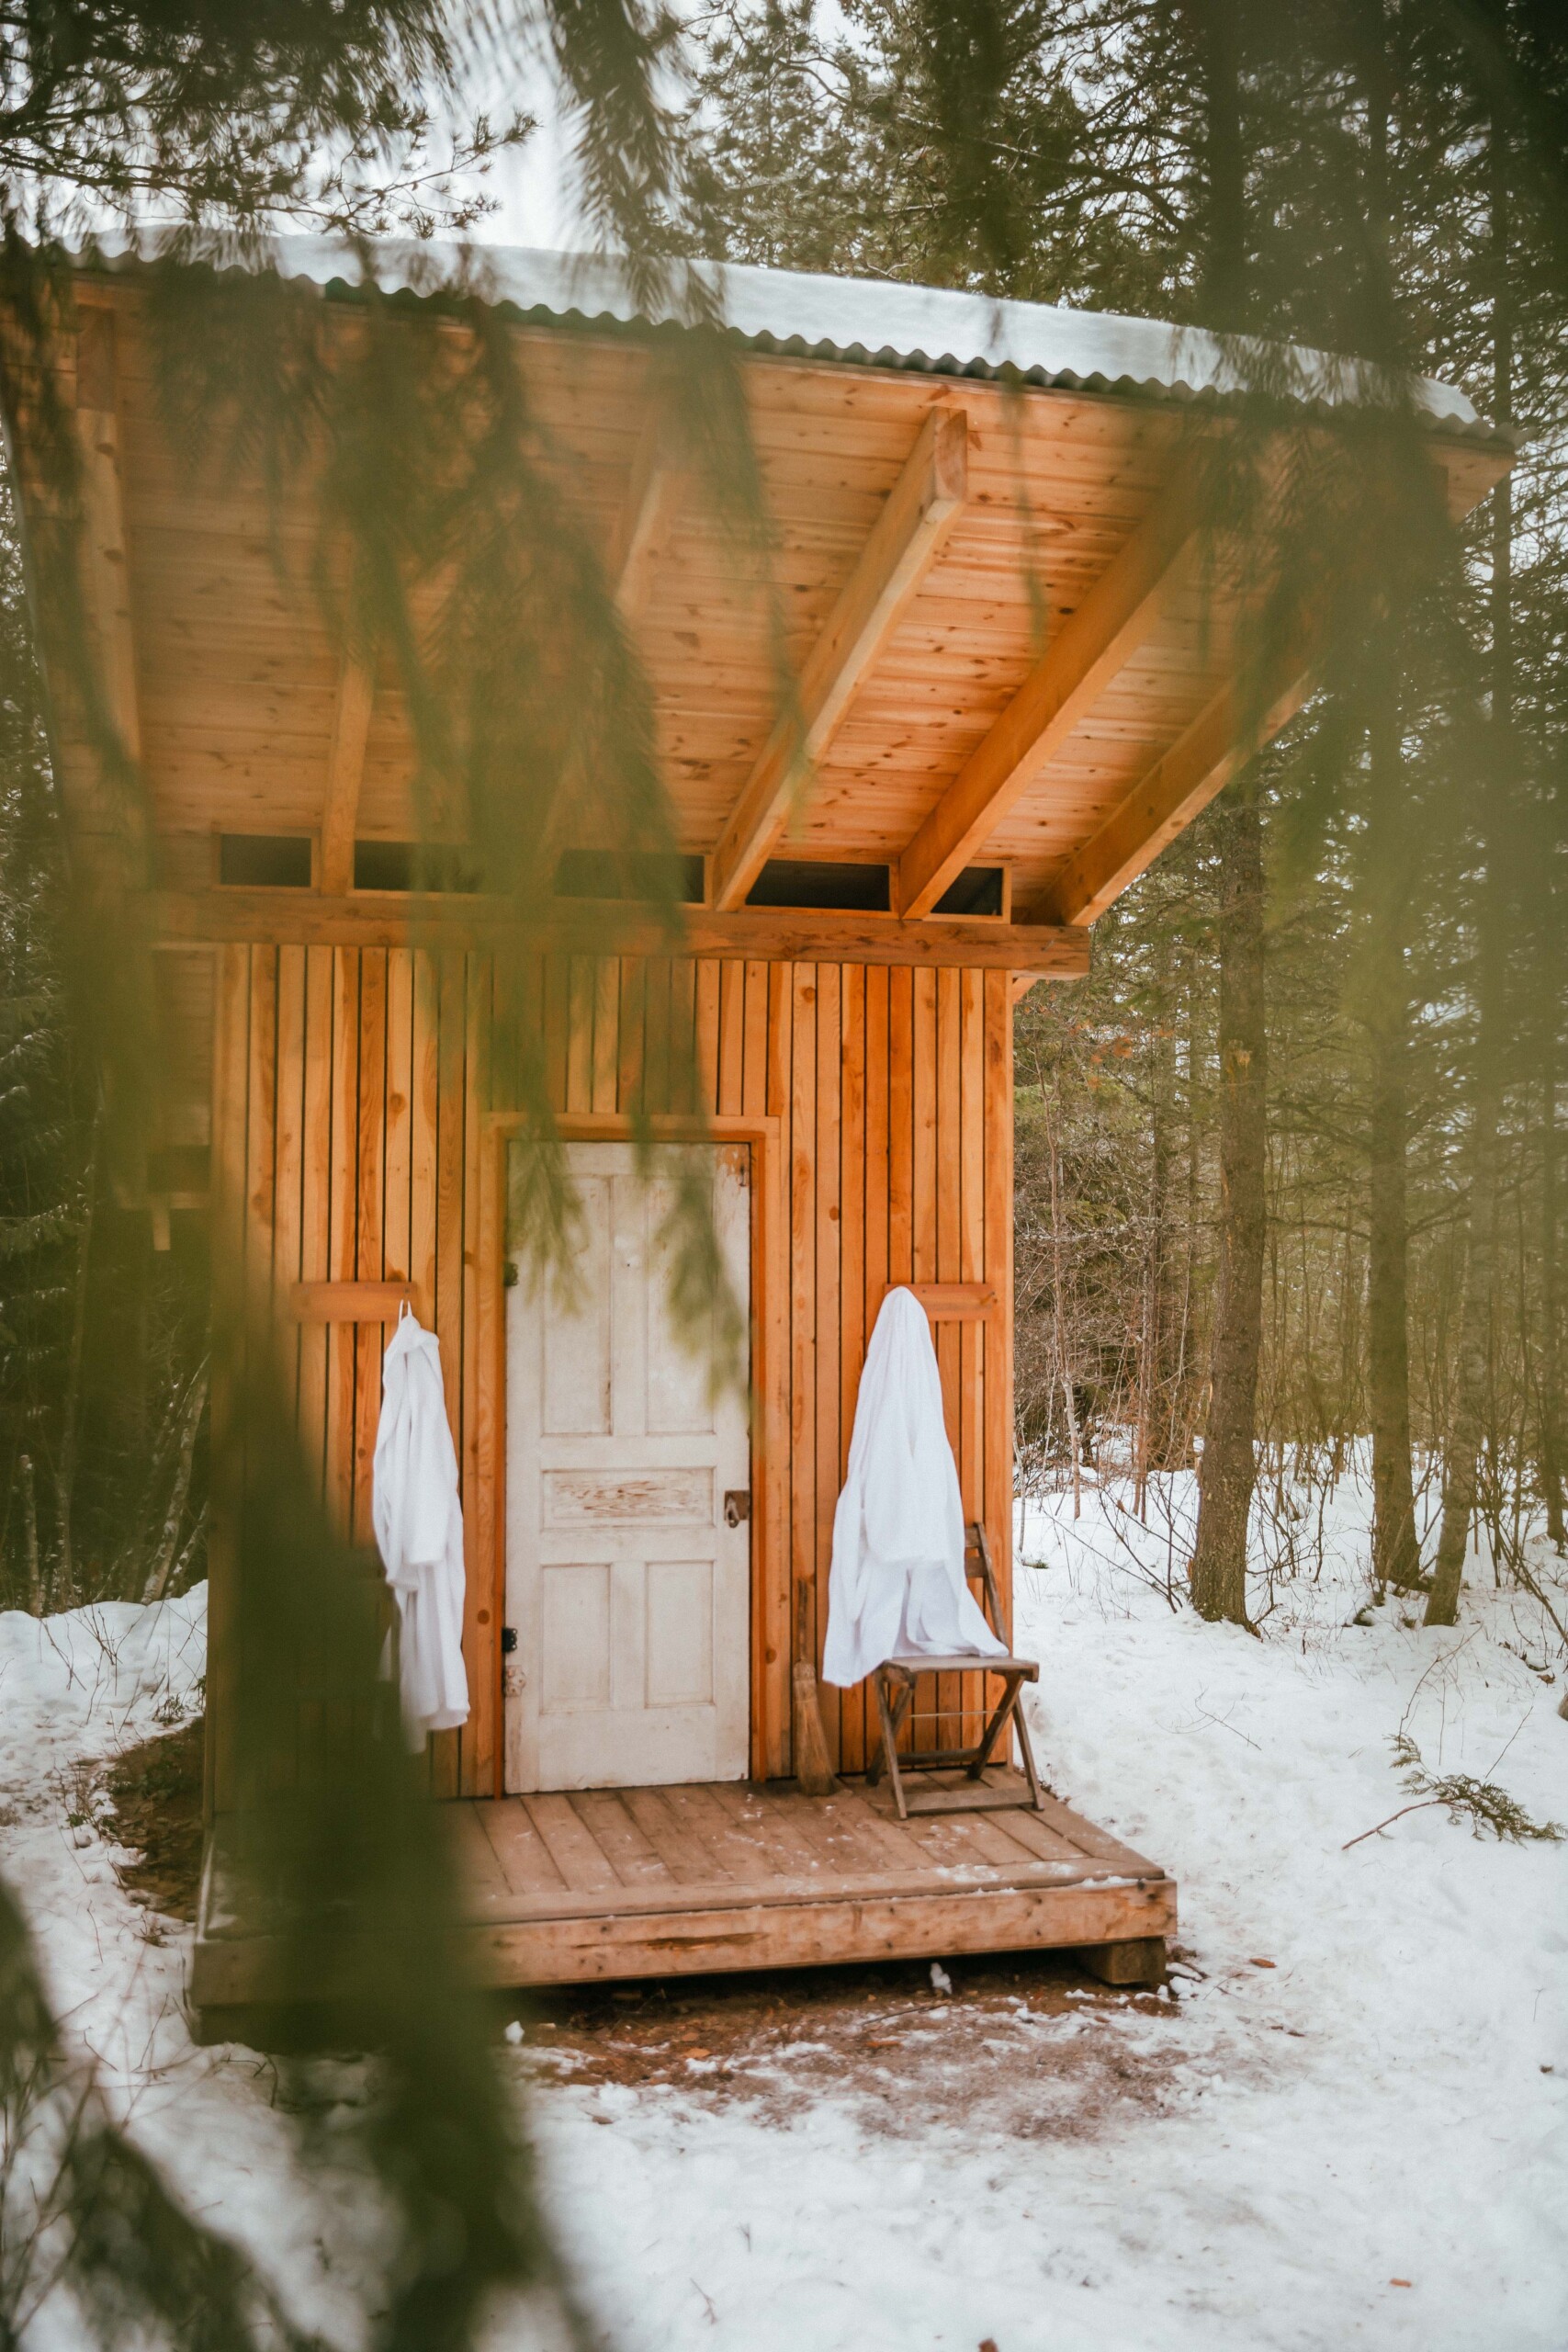 A wood-fired sauna with robes.